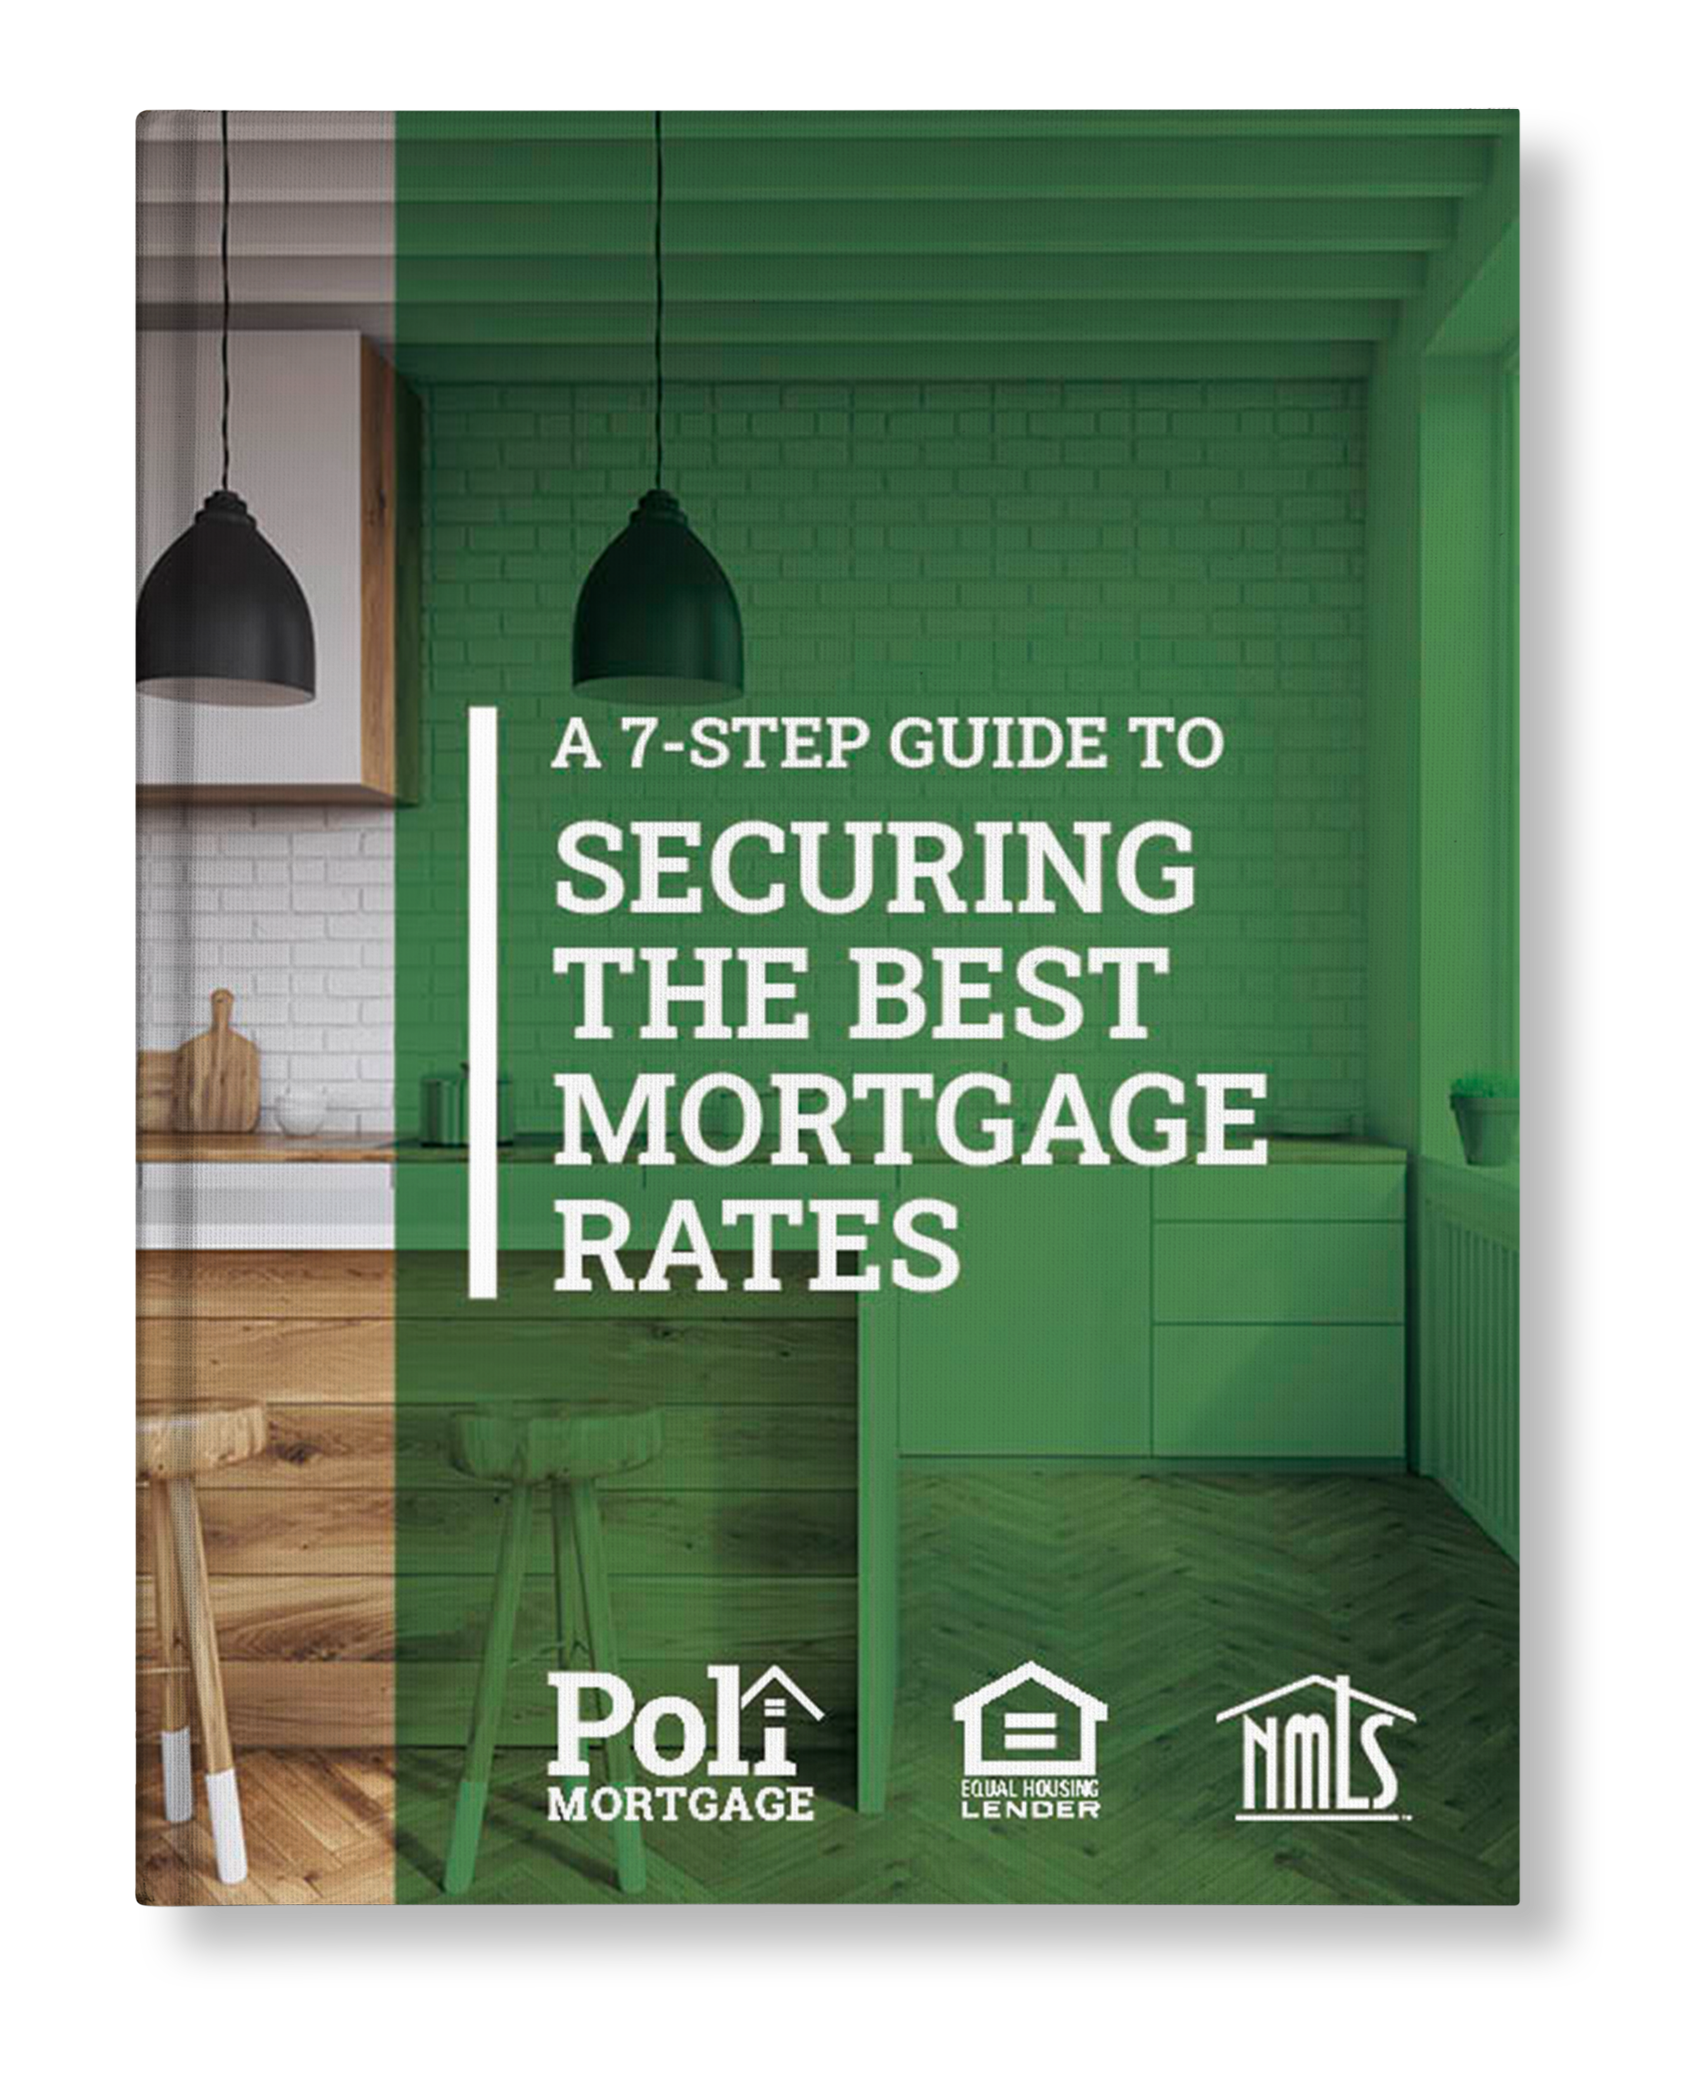 a-7-step-guide-to-securing-the-best-mortgage-rates-shadow